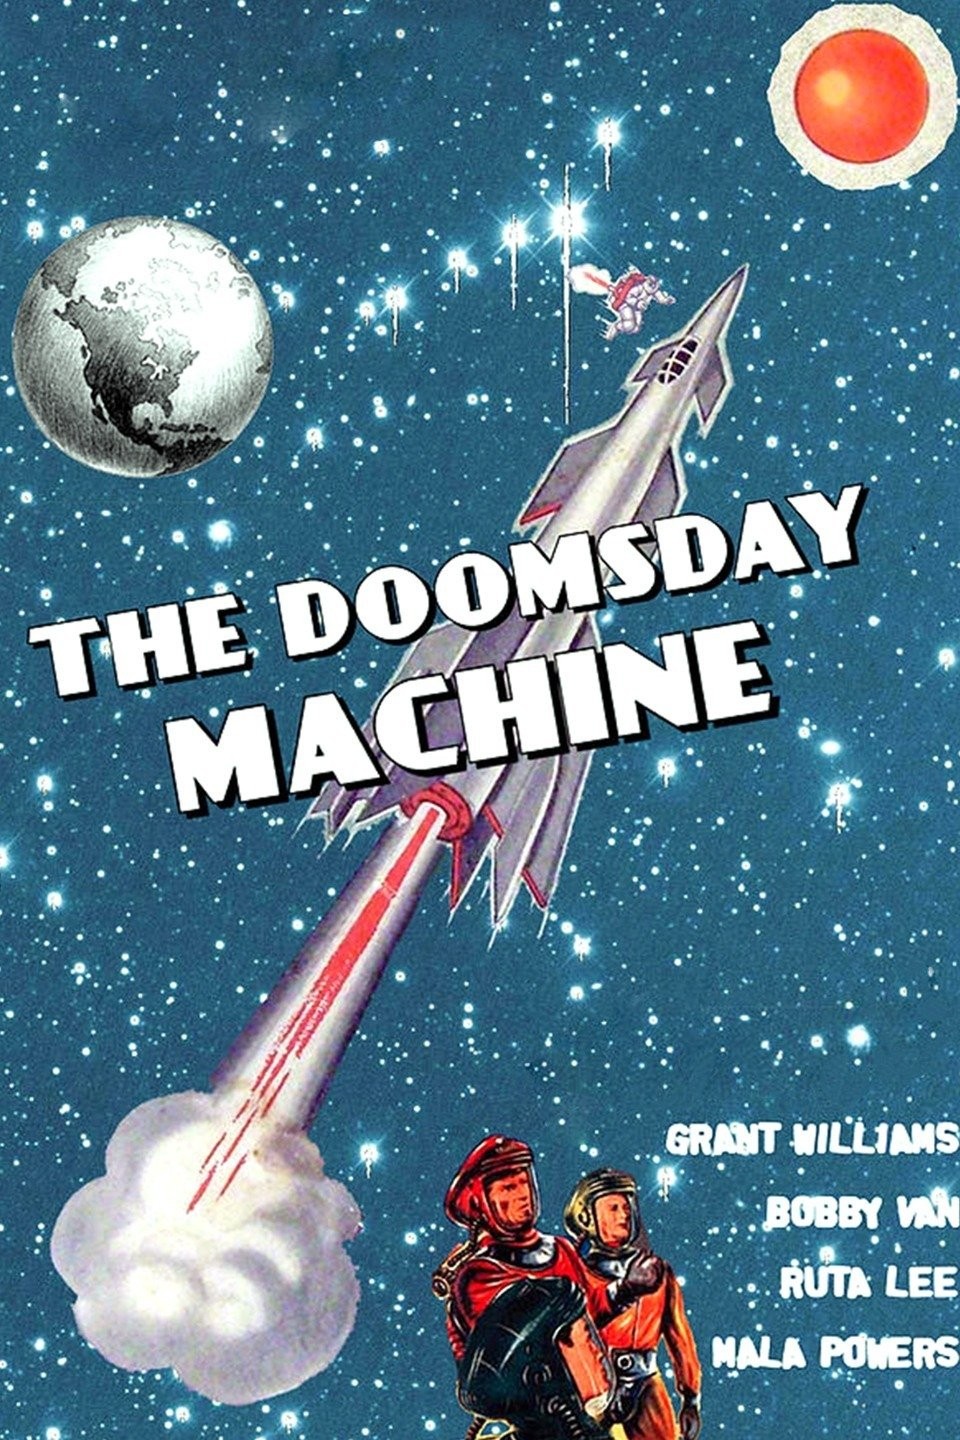 The Doomsday Machine Rotten Tomatoes